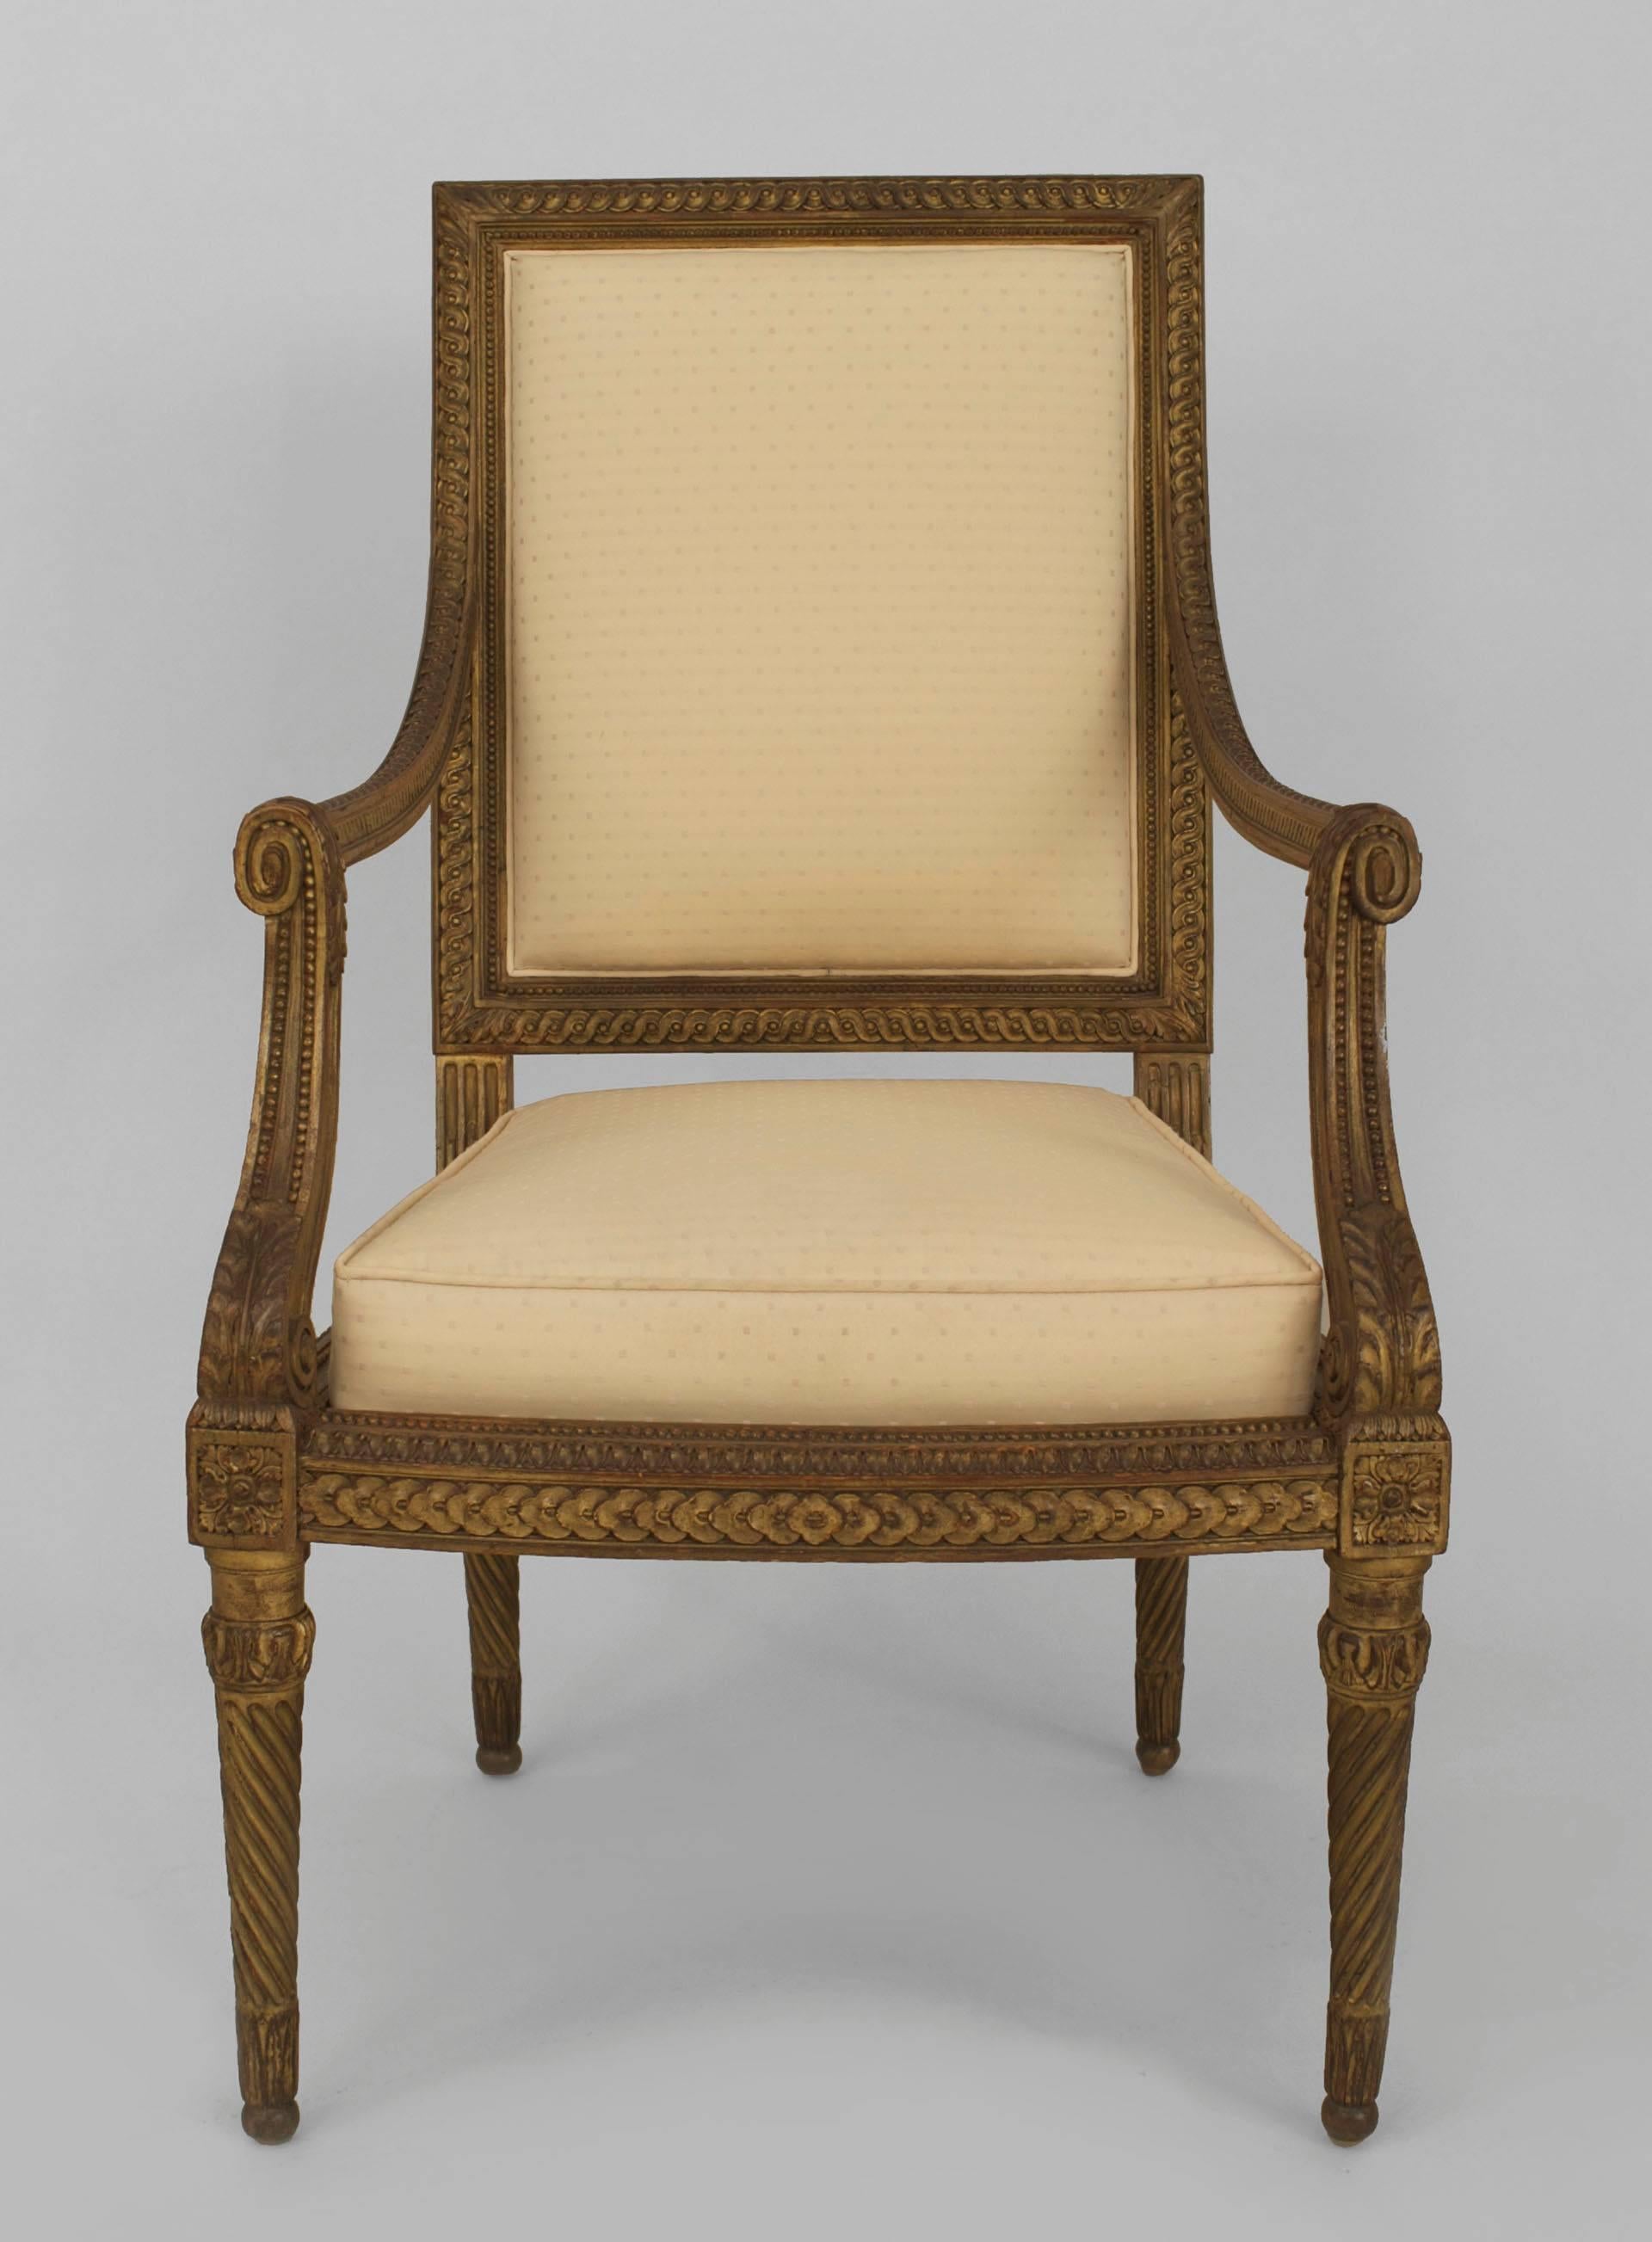 Pair of French Louis XVI style (19th century) gilt open armchairs with a carved frame on swirl form tapered legs with a light beige fabric upholstered back and box form seat.
   